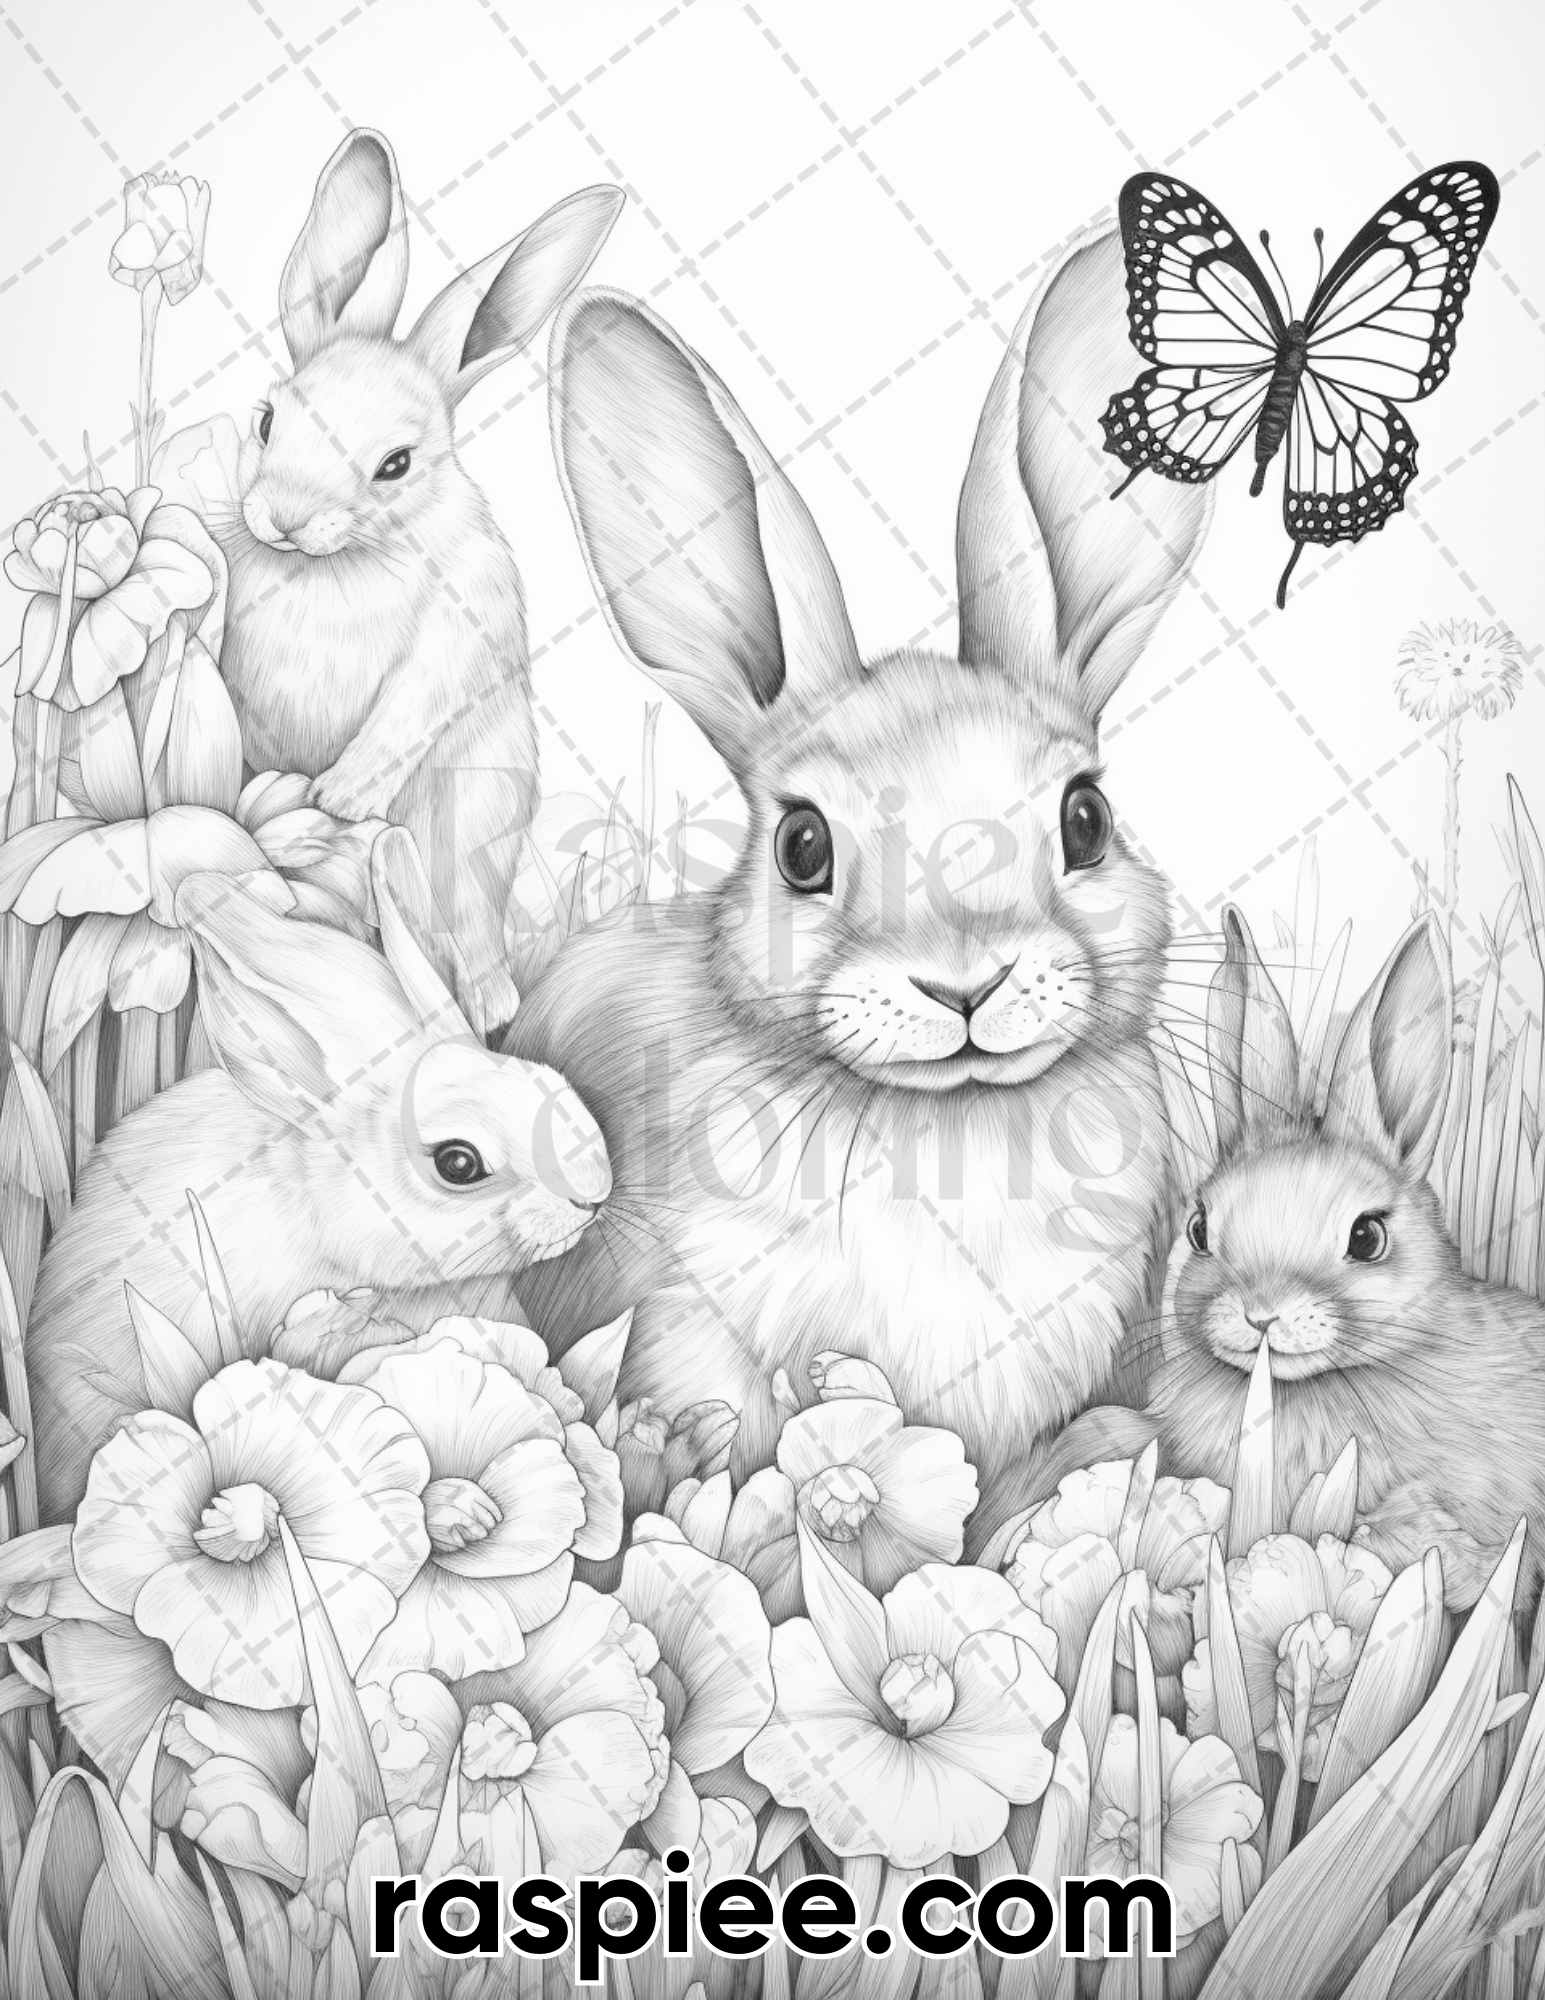 Enchanting spring animals grayscale adult coloring pages printable â coloring